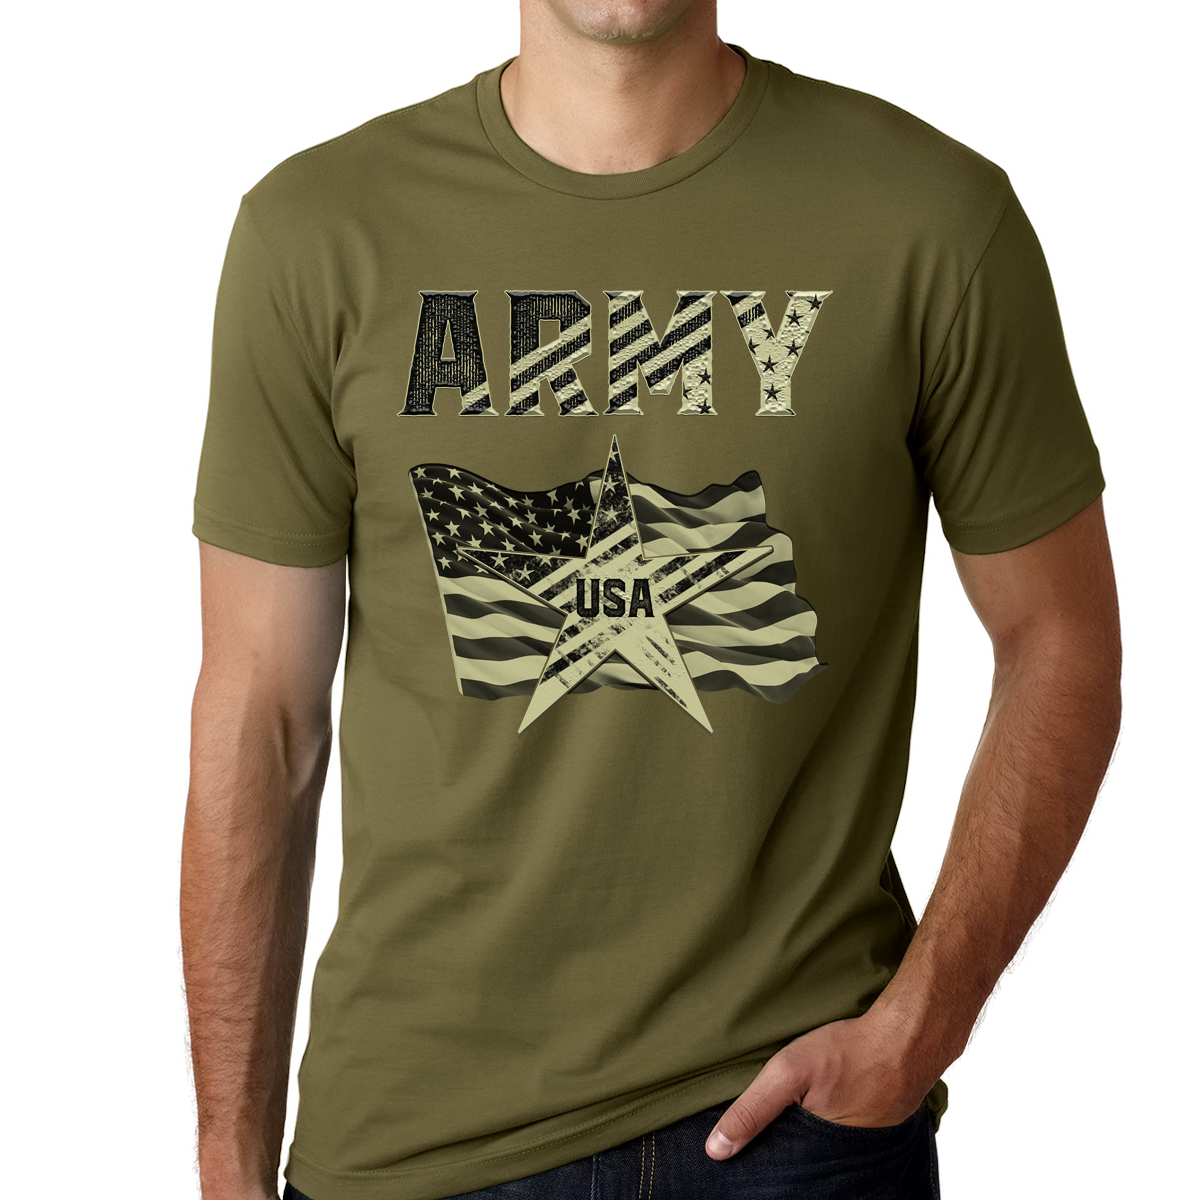 Army Shirts for Men Military Green Tactical Shirts for Men Combat Shirt Military Shirts for Men